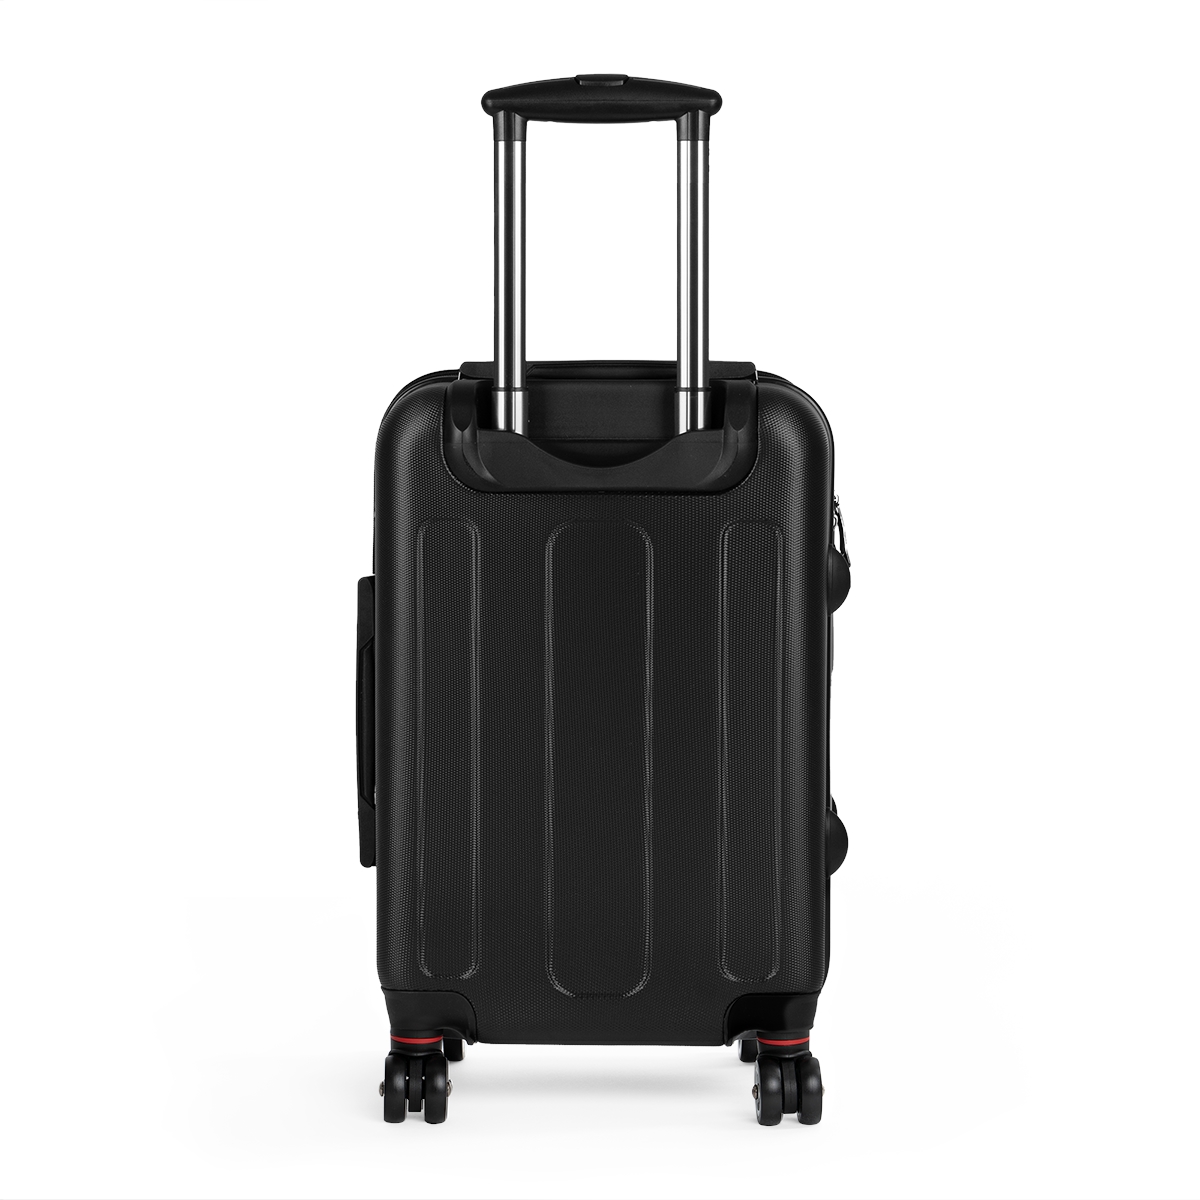 Trinity Cymbals Tour Suitcases product thumbnail image